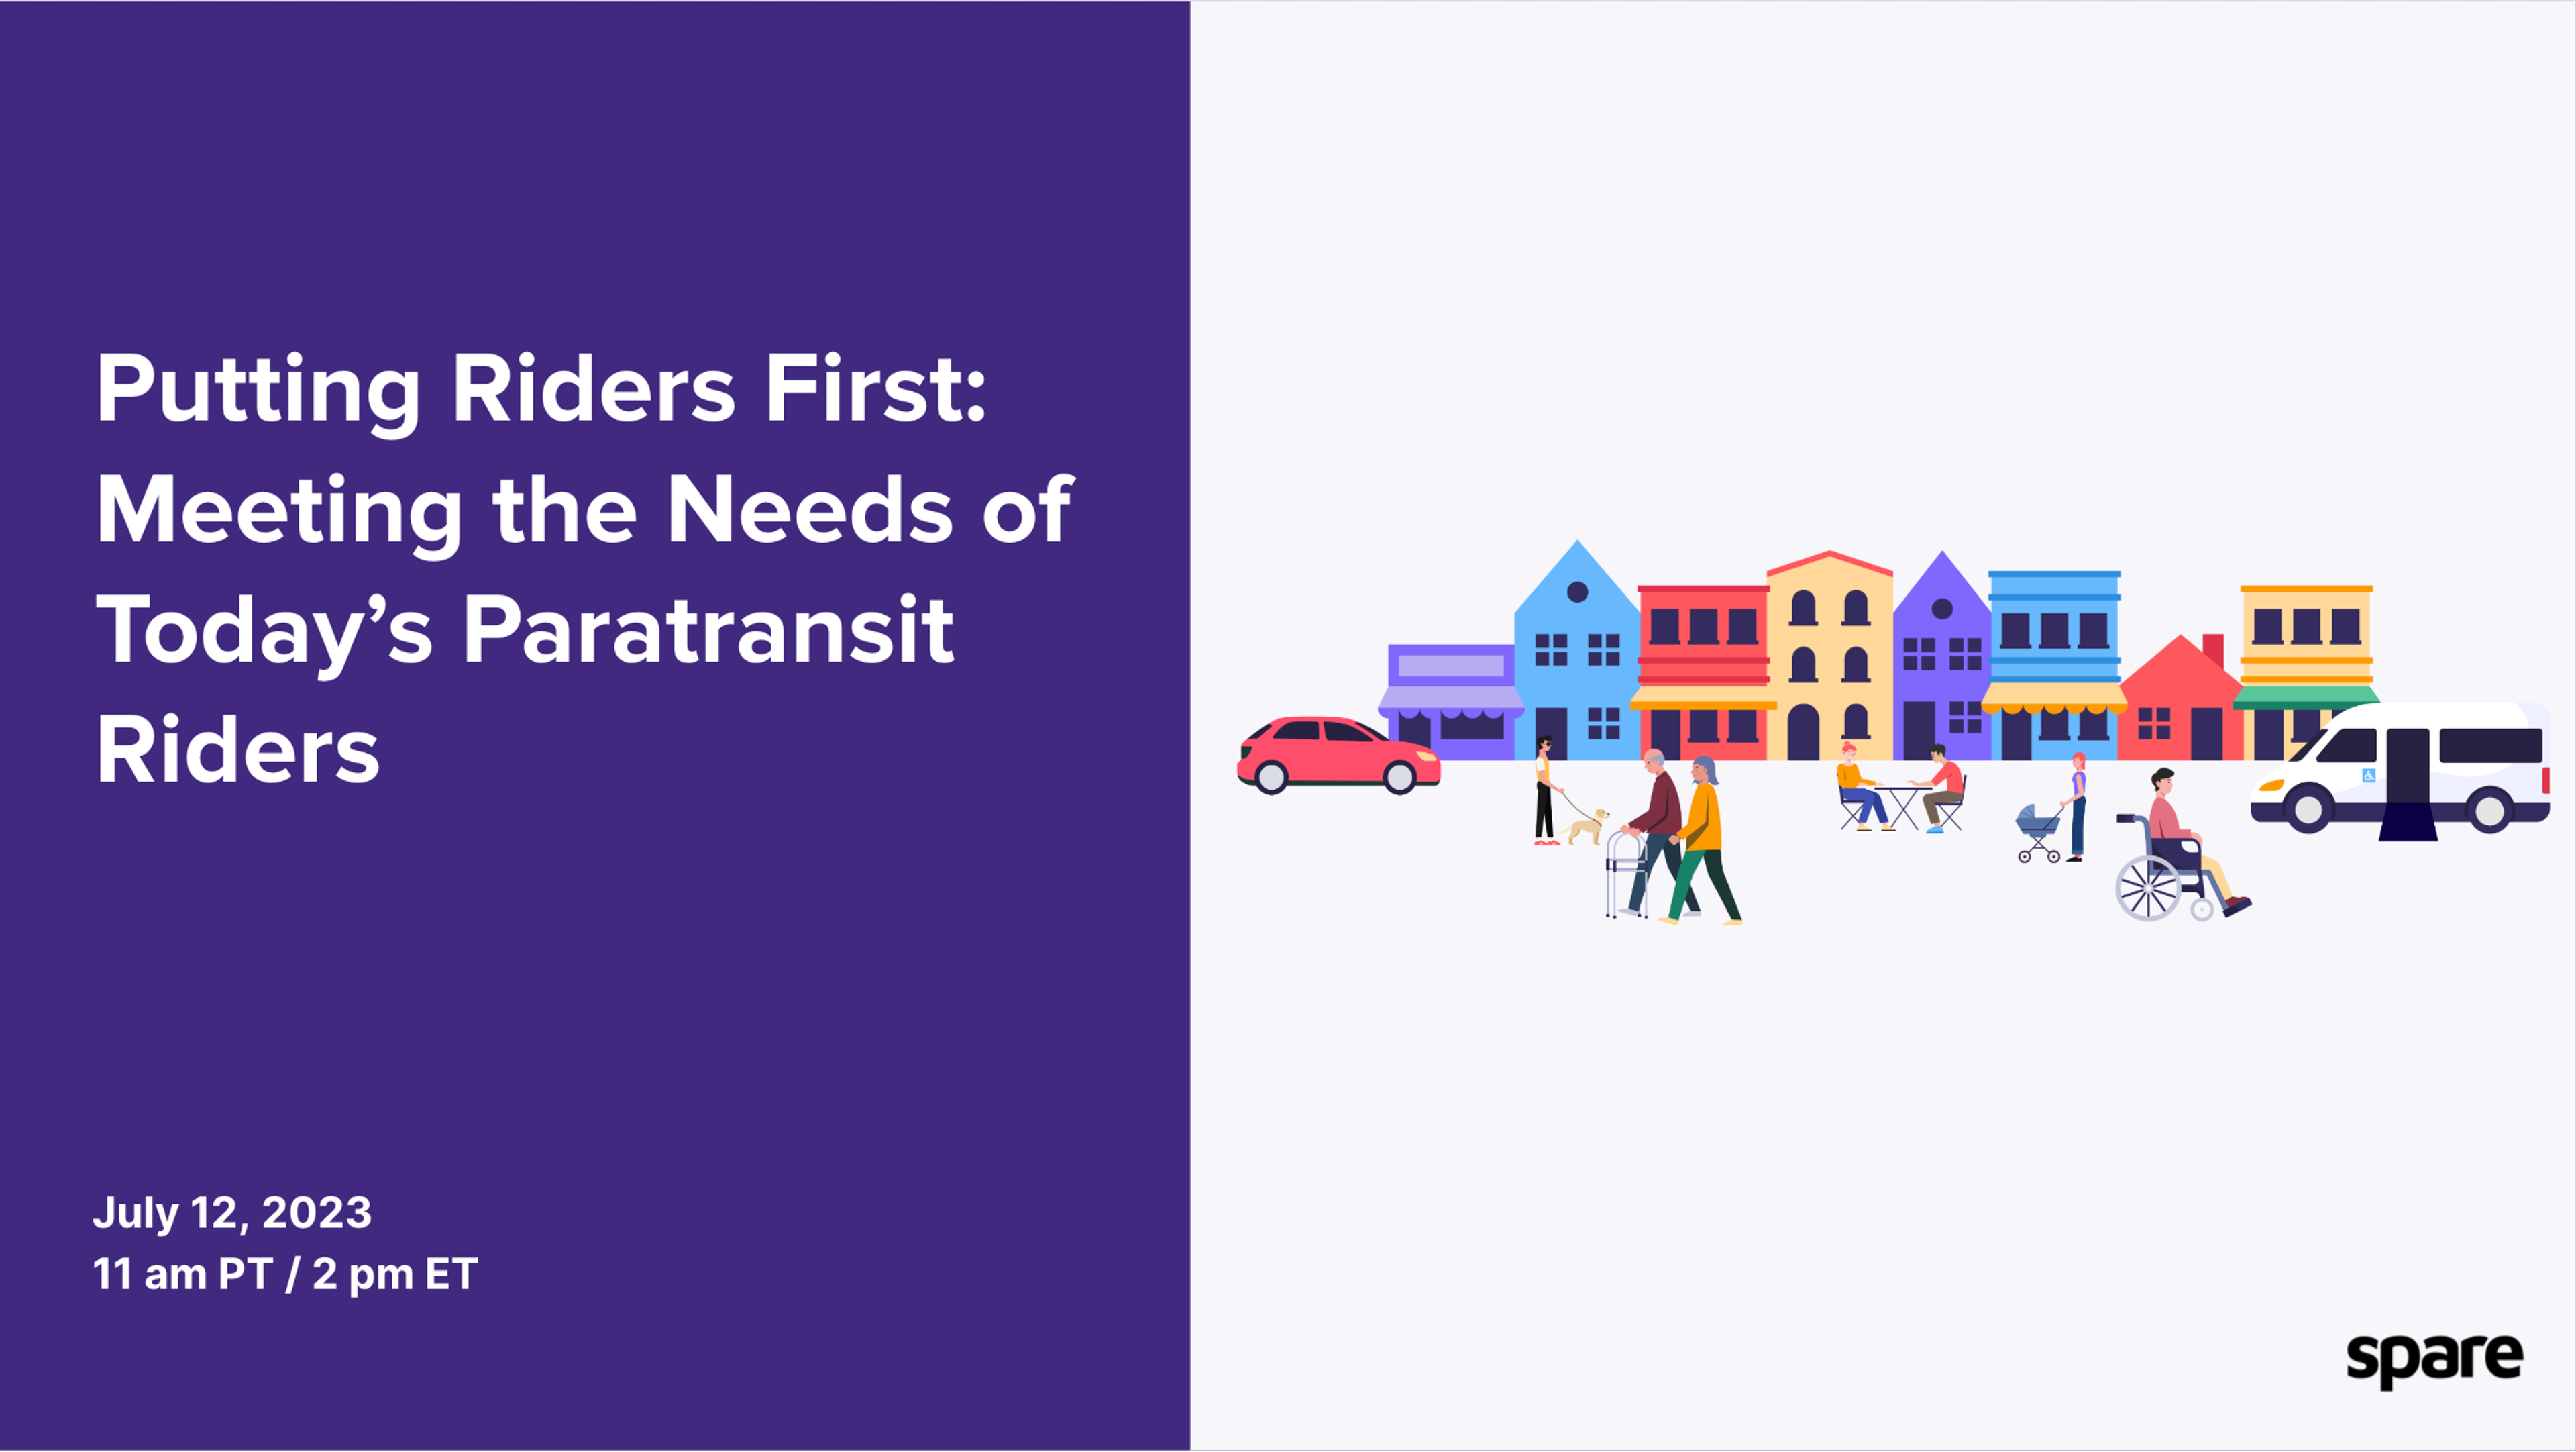 Putting Riders First: Meeting the Needs of Today's Paratransit Riders